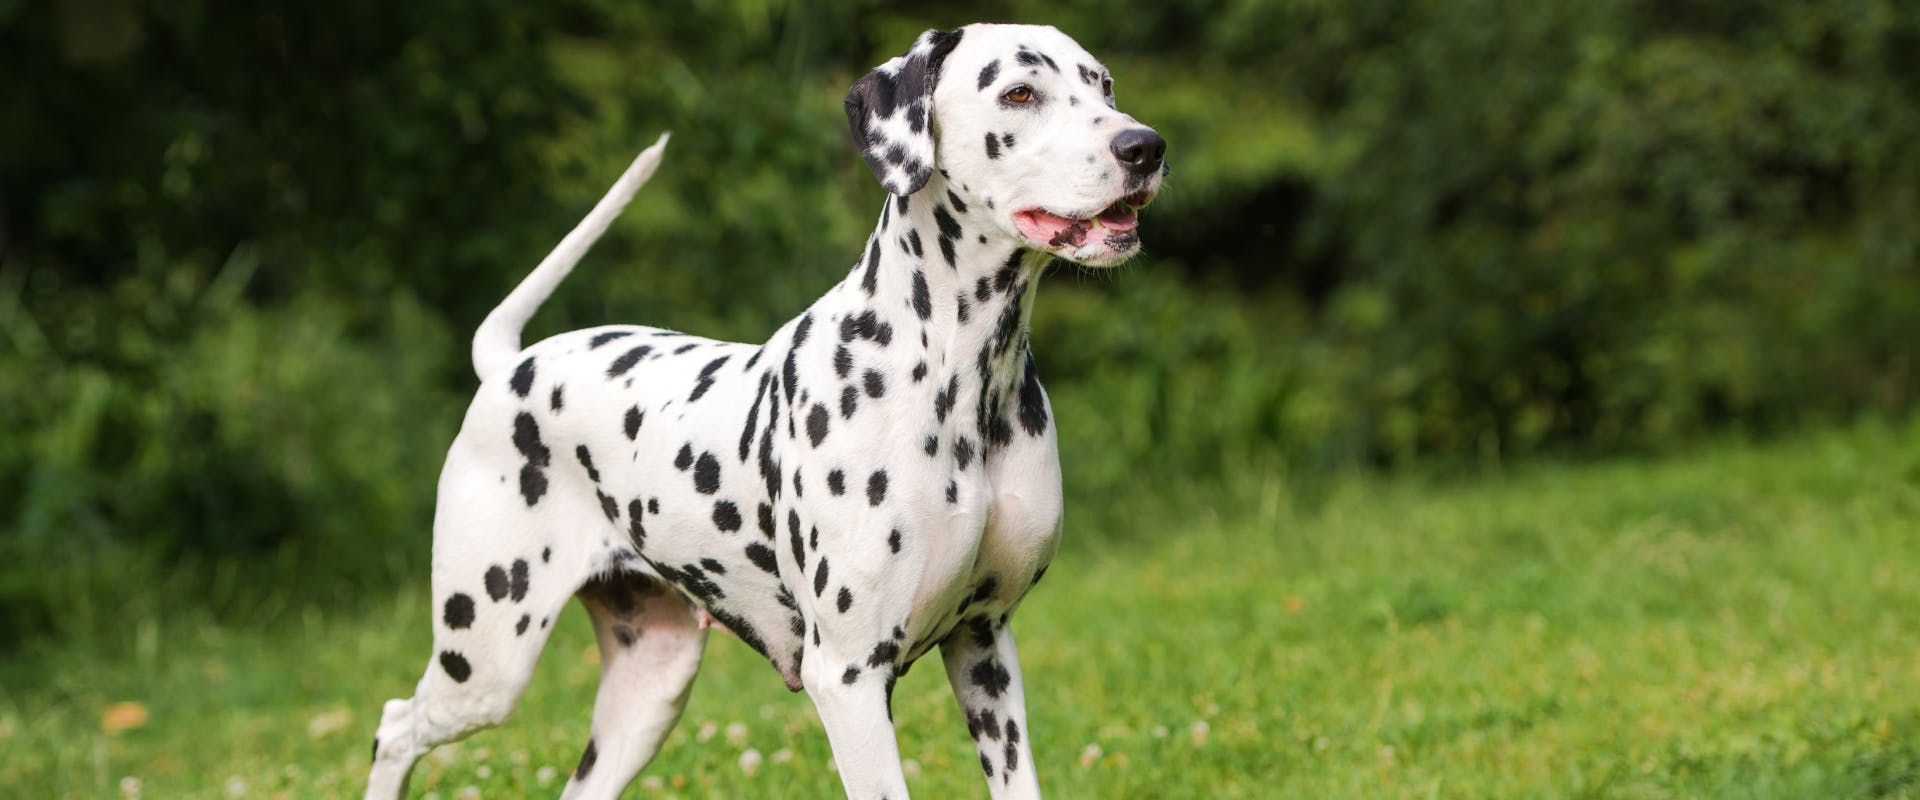 dalmatian stood up in on grass in a park